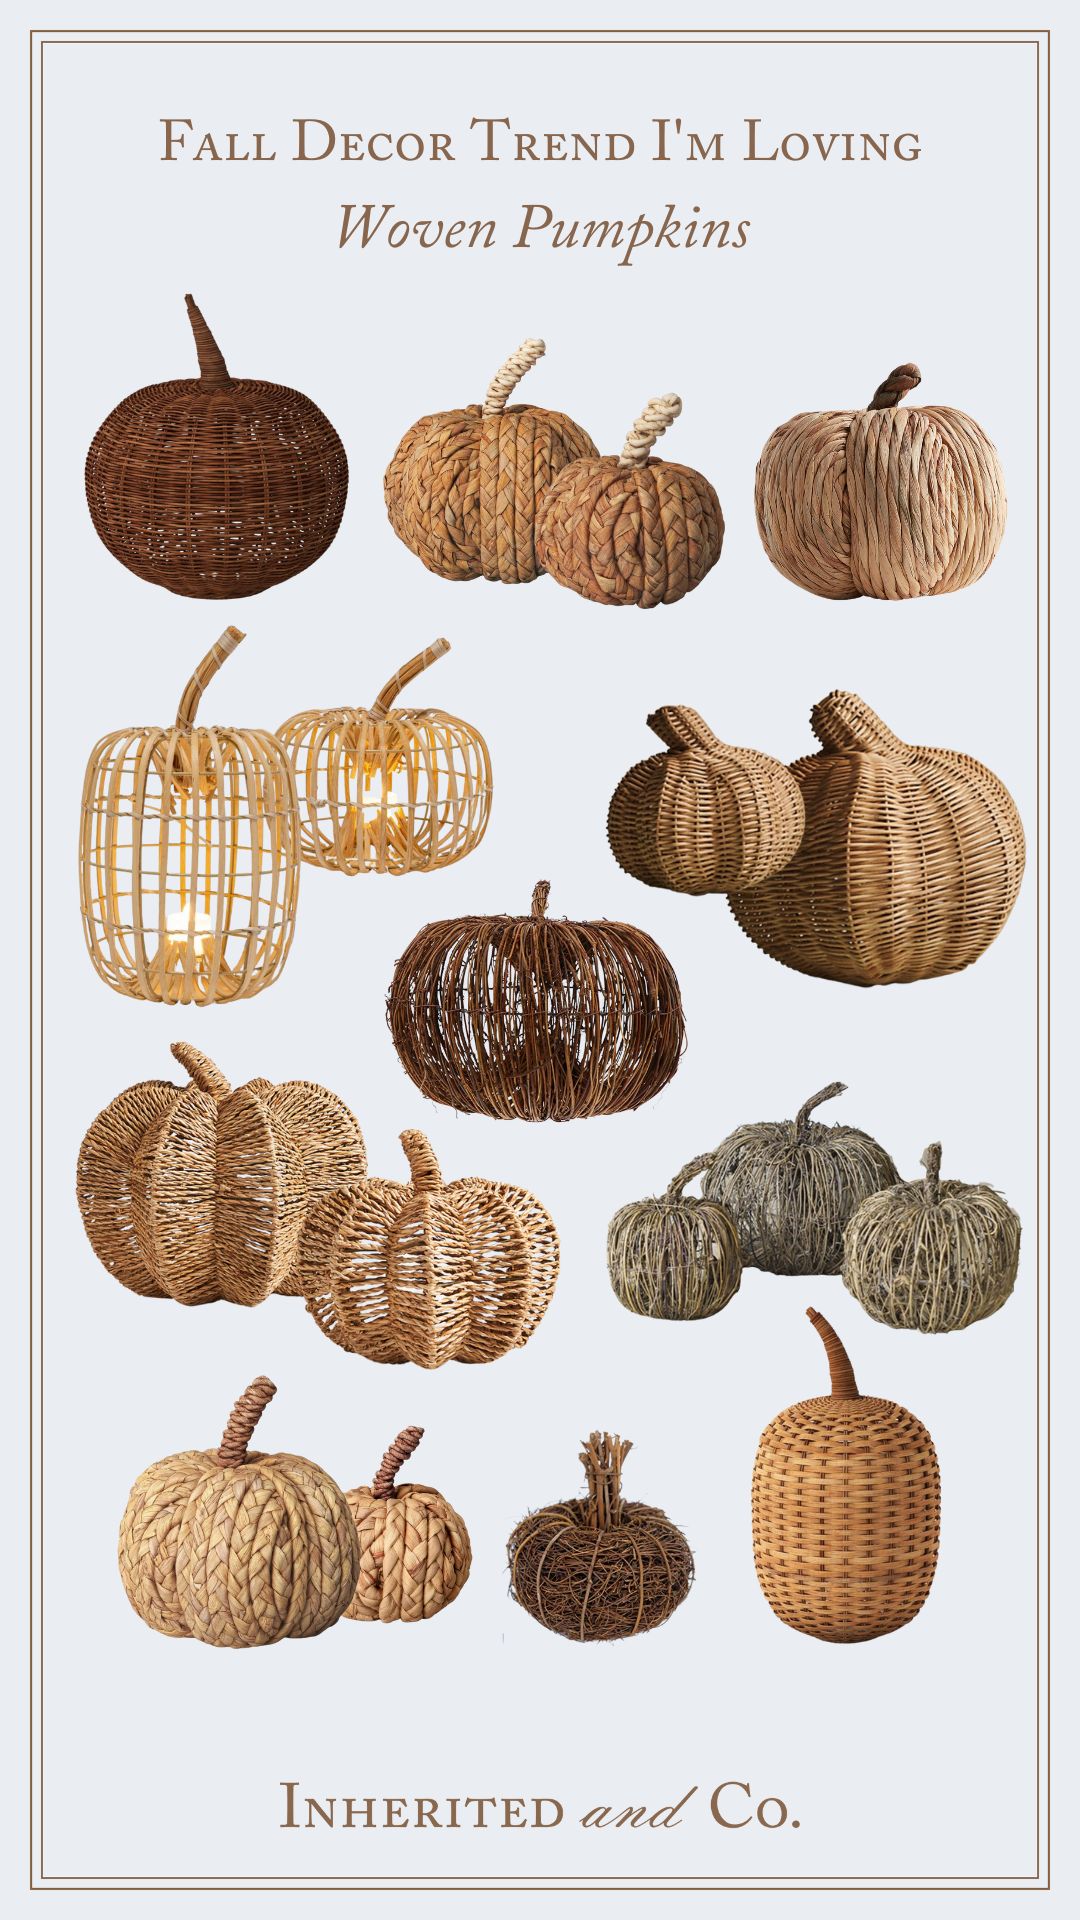 Graphic with pale blue background and woven pumpkins in the foreground